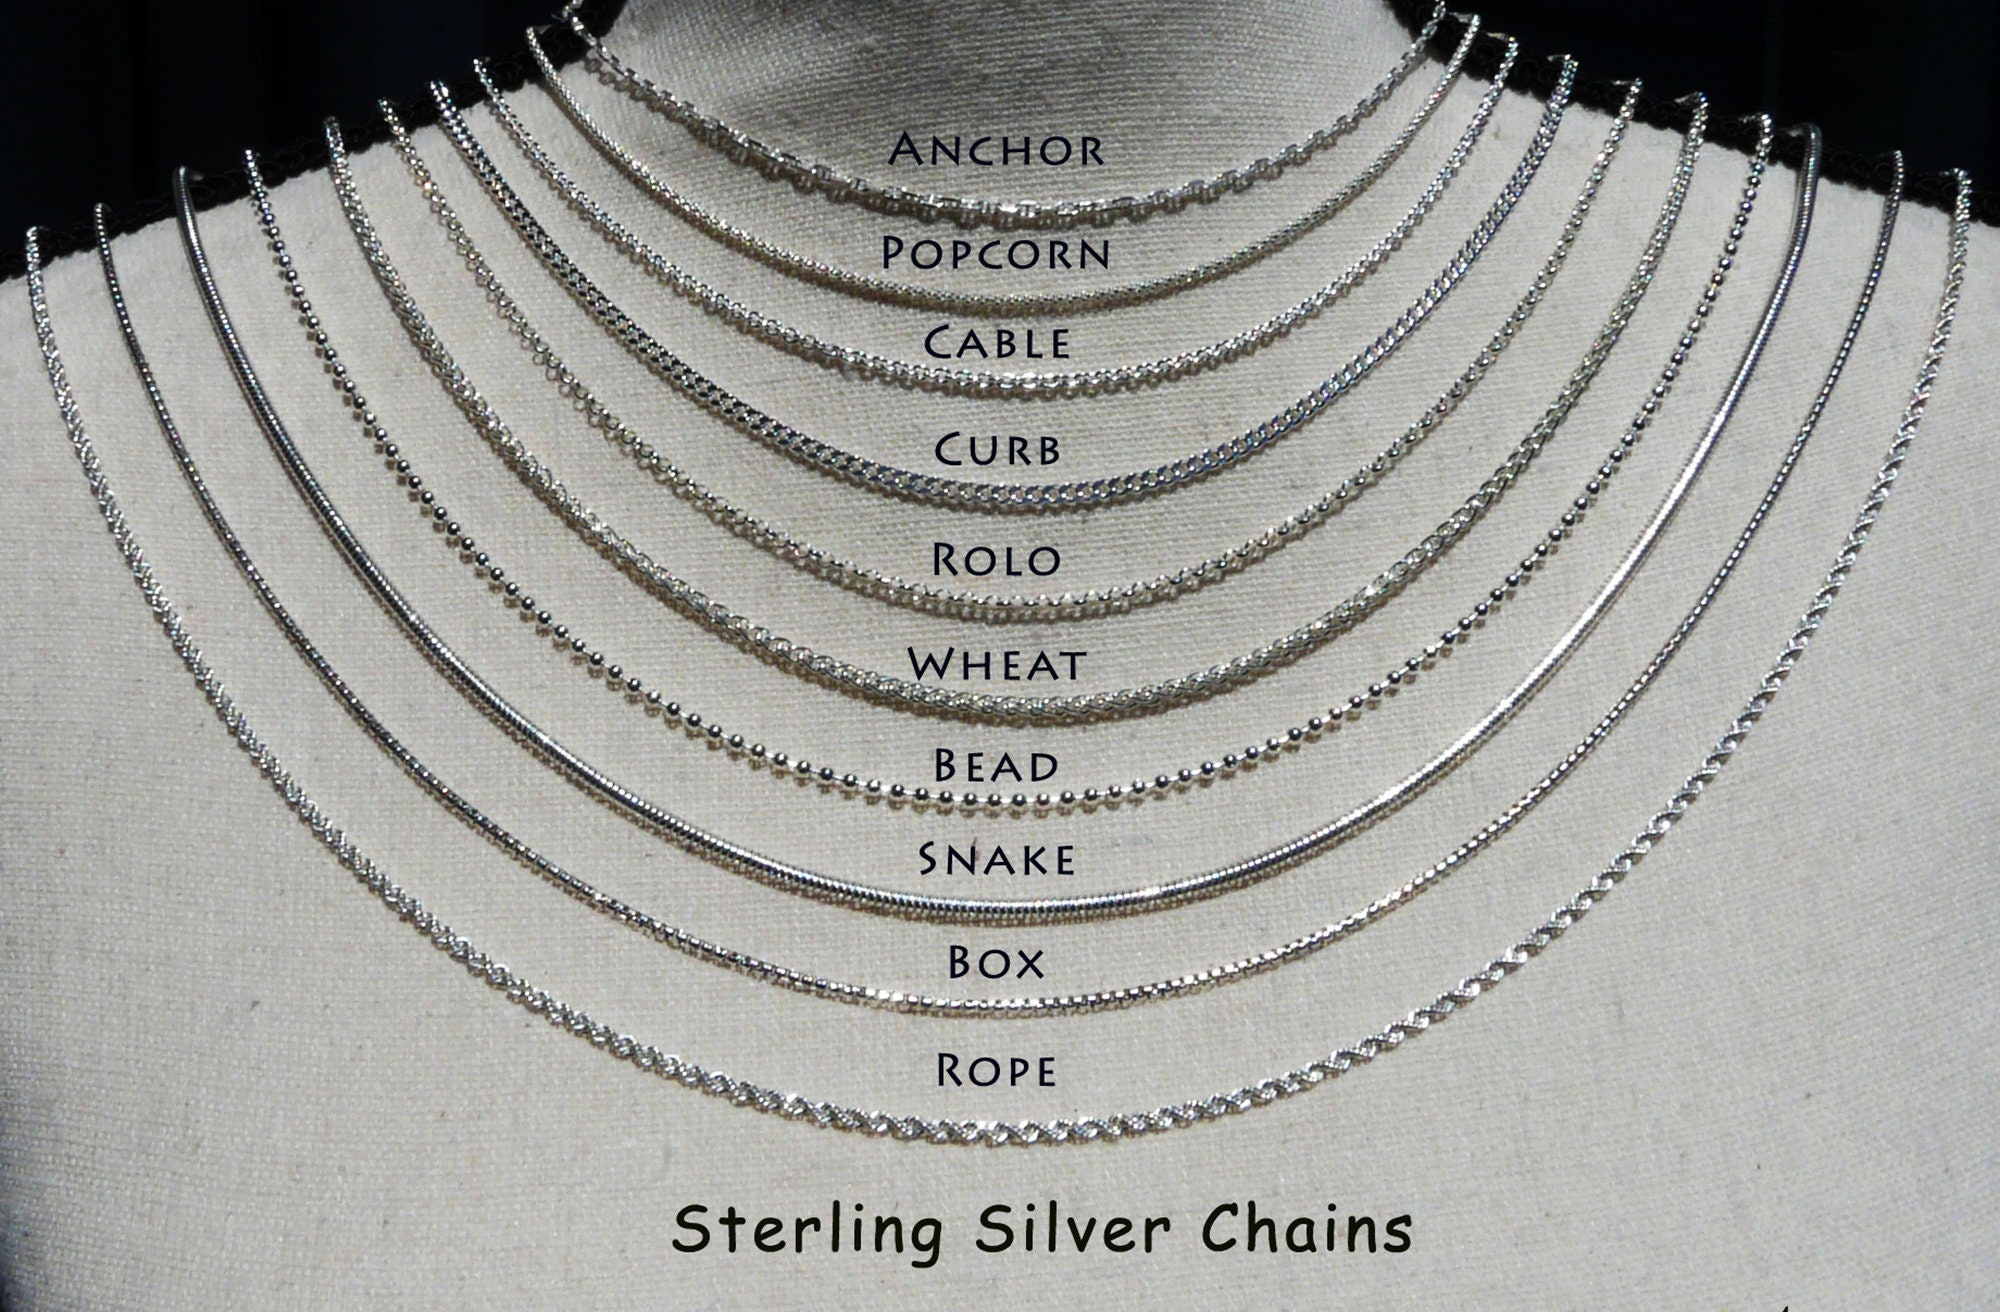 Strong 925 Silver for layering and charms 20 inch Sterling Silver 1.2mm Curb Chain Necklace with Lobster Clasp